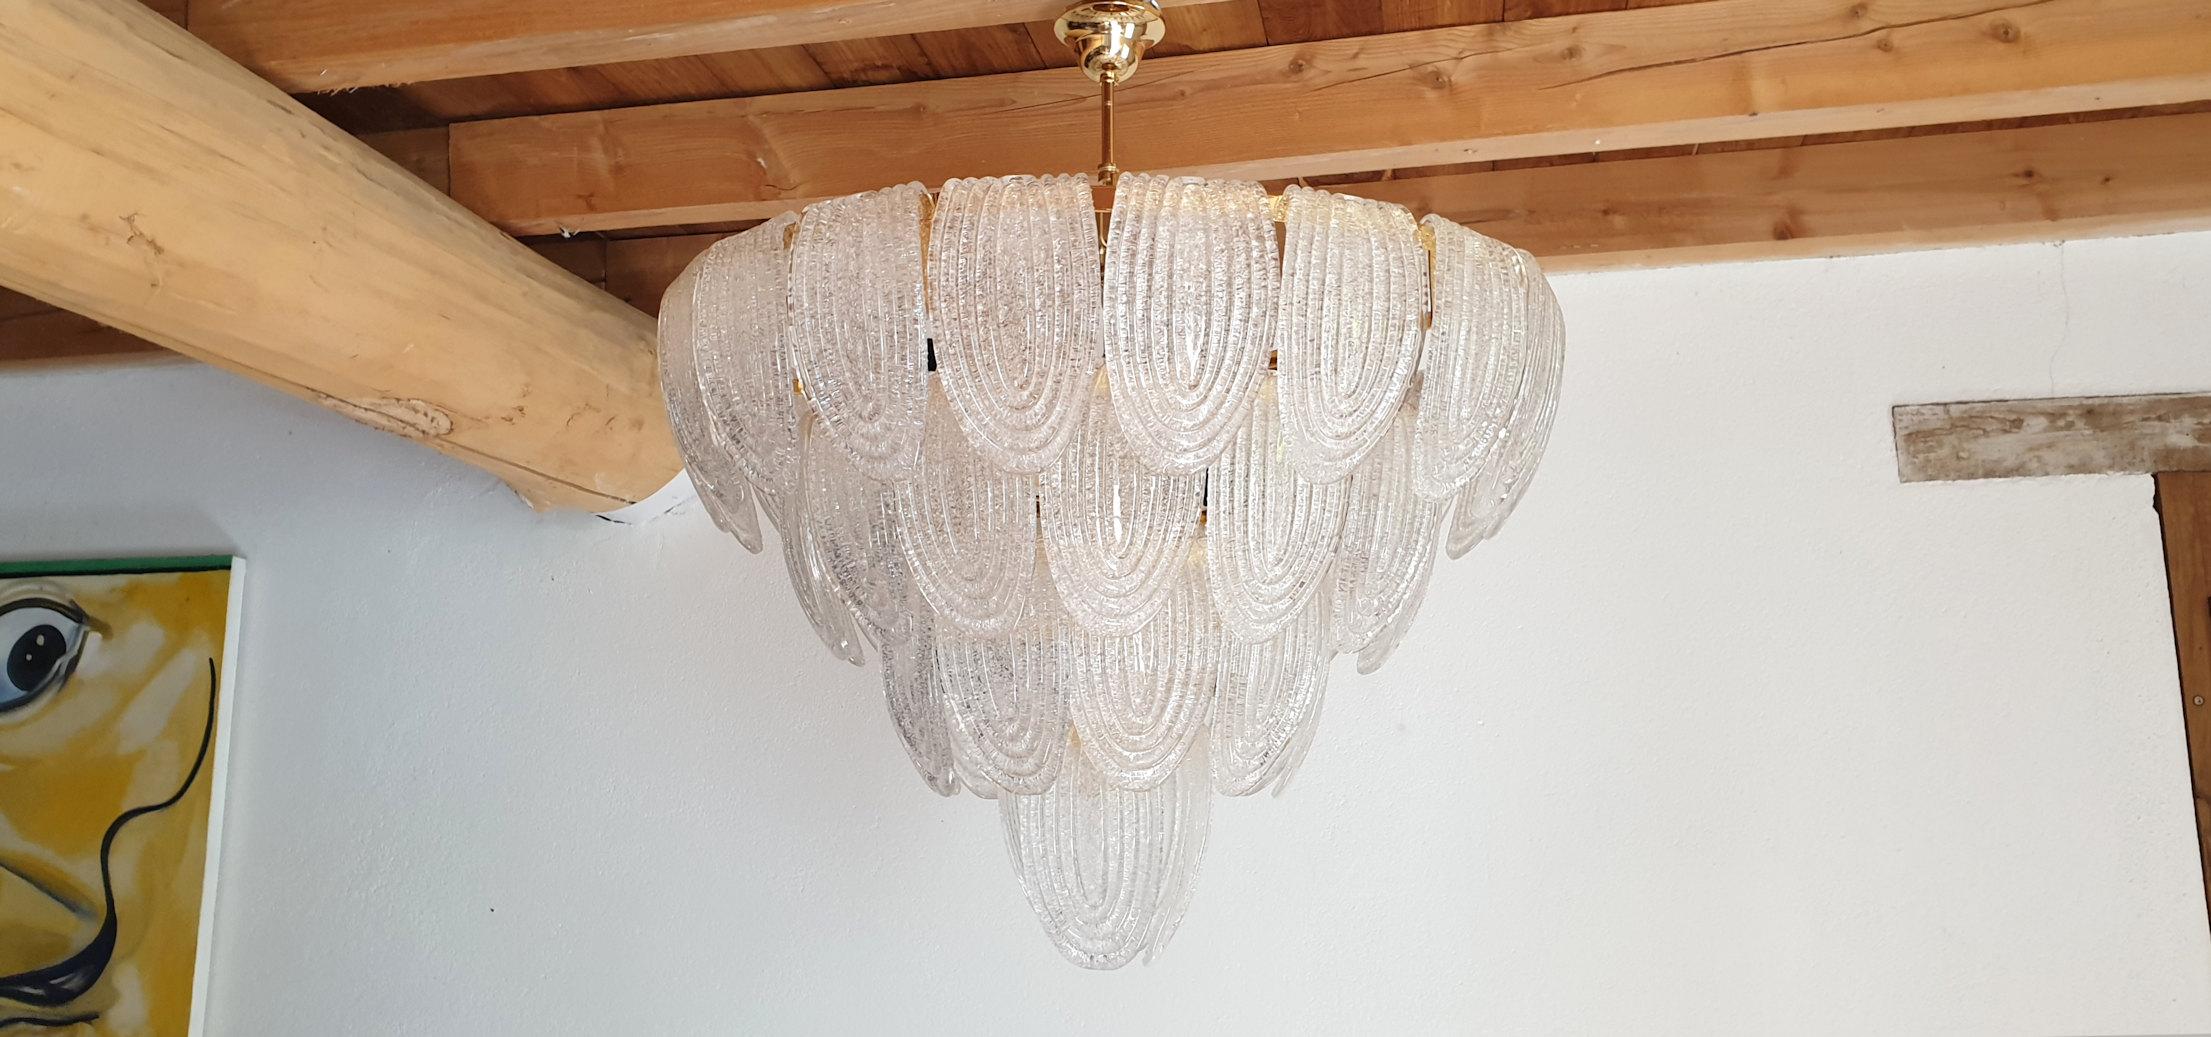 Hand-Crafted Large Mid-Century Modern Murano Glass Chandelier/Flushmount Mazzega Style 1970s